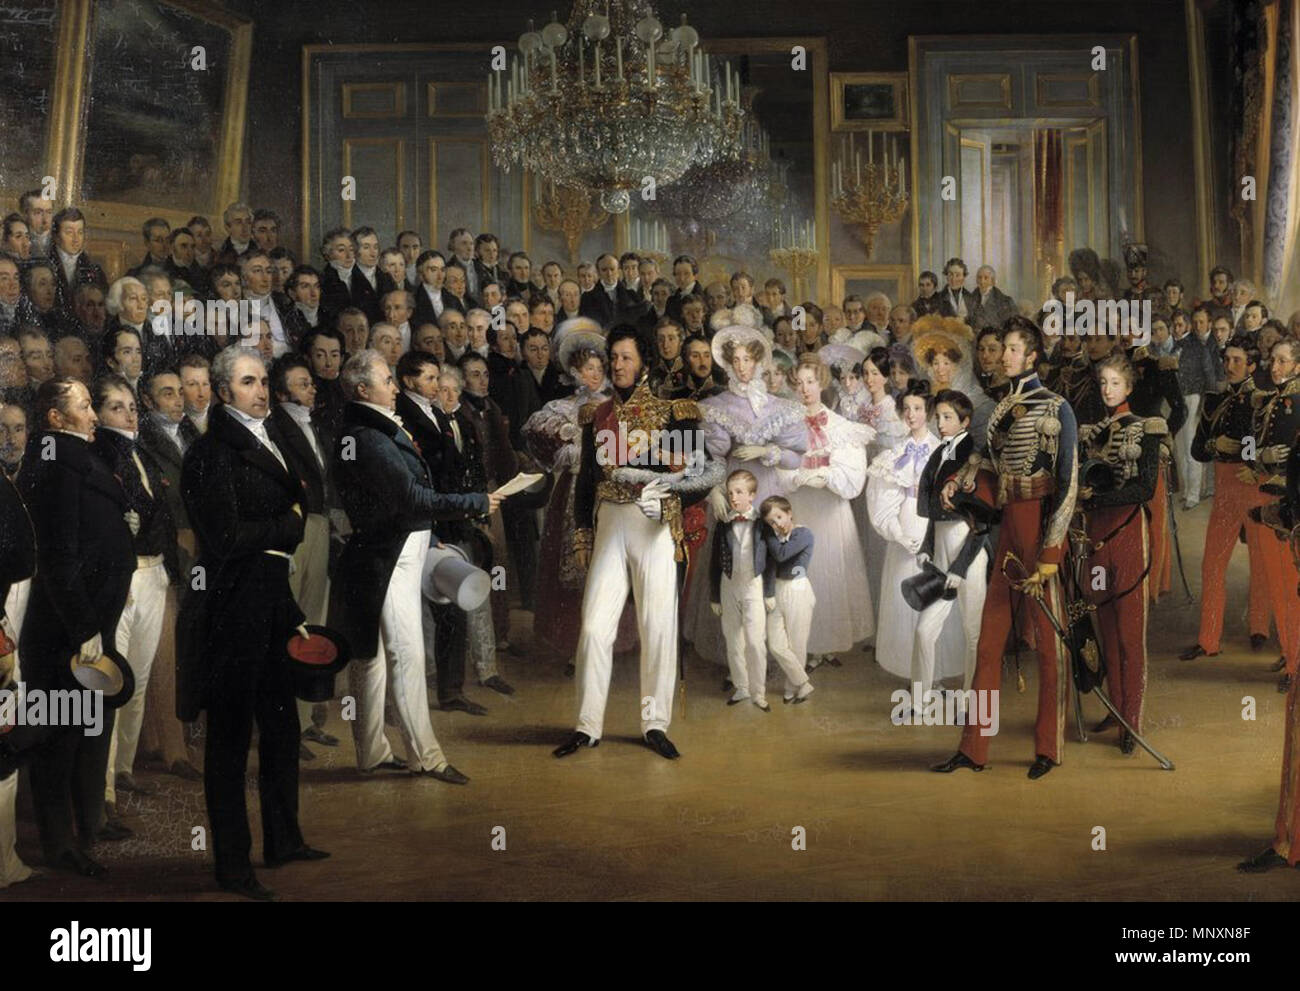 . English: The members of the Chamber of Deputies are received at the Palais Royal by the duke of Orleans and his family, Paris 7th August 1830 . 2 January 2018. Francois Joseph Heim 1172 The Duke of Orleans receives at the Palais Royal the members of the Chambers of Deputies, 7 August 1830 Stock Photo